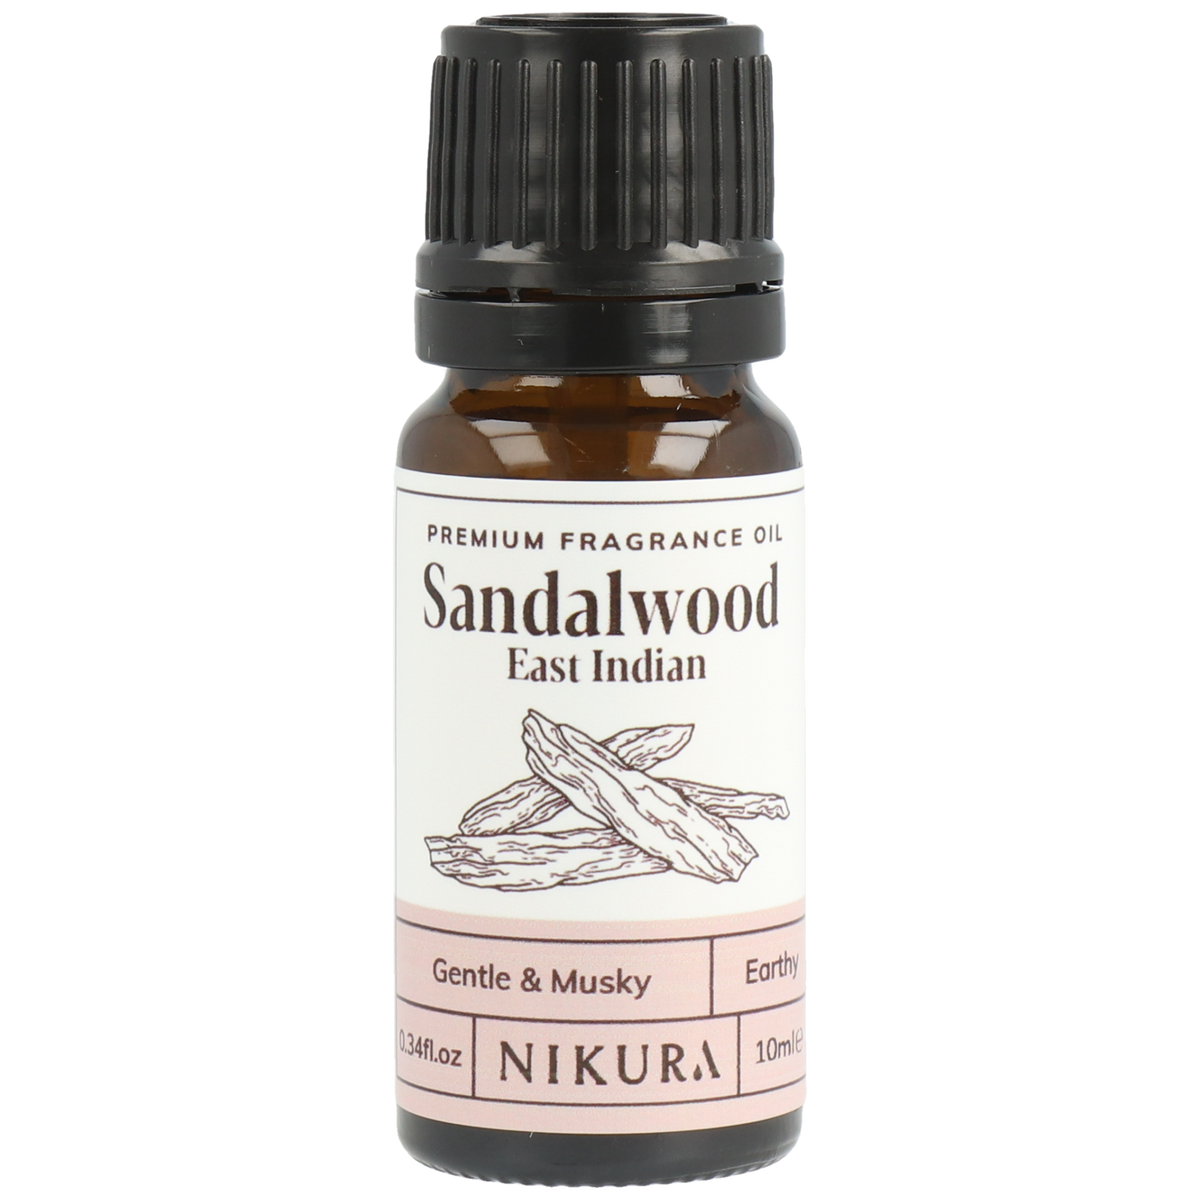 Florona Sandalwood Premium Quality Fragrance Oil - 4 fl oz Therapeutic  Grade for Skin Care & Focus, Woody and Earthy Aroma for Clarity, Diffuser  Aromatherapy